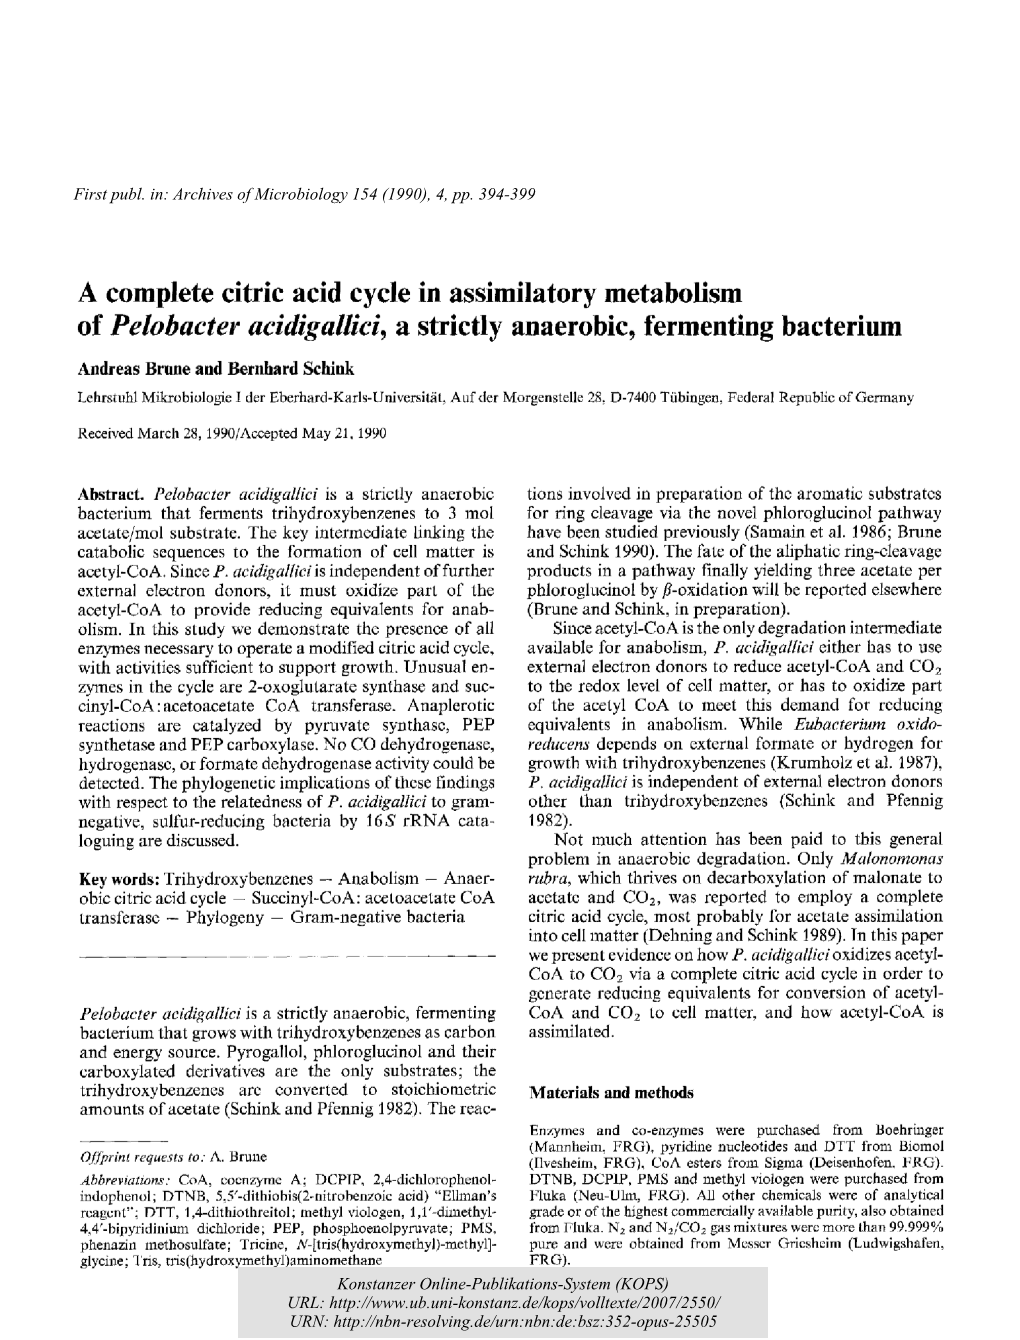 A Complete Citric Acid Cycle in Assimilatory Metabolism of Pelobacter Acidigallici, a Strictly Anaerobic, Fermenting Bacterium